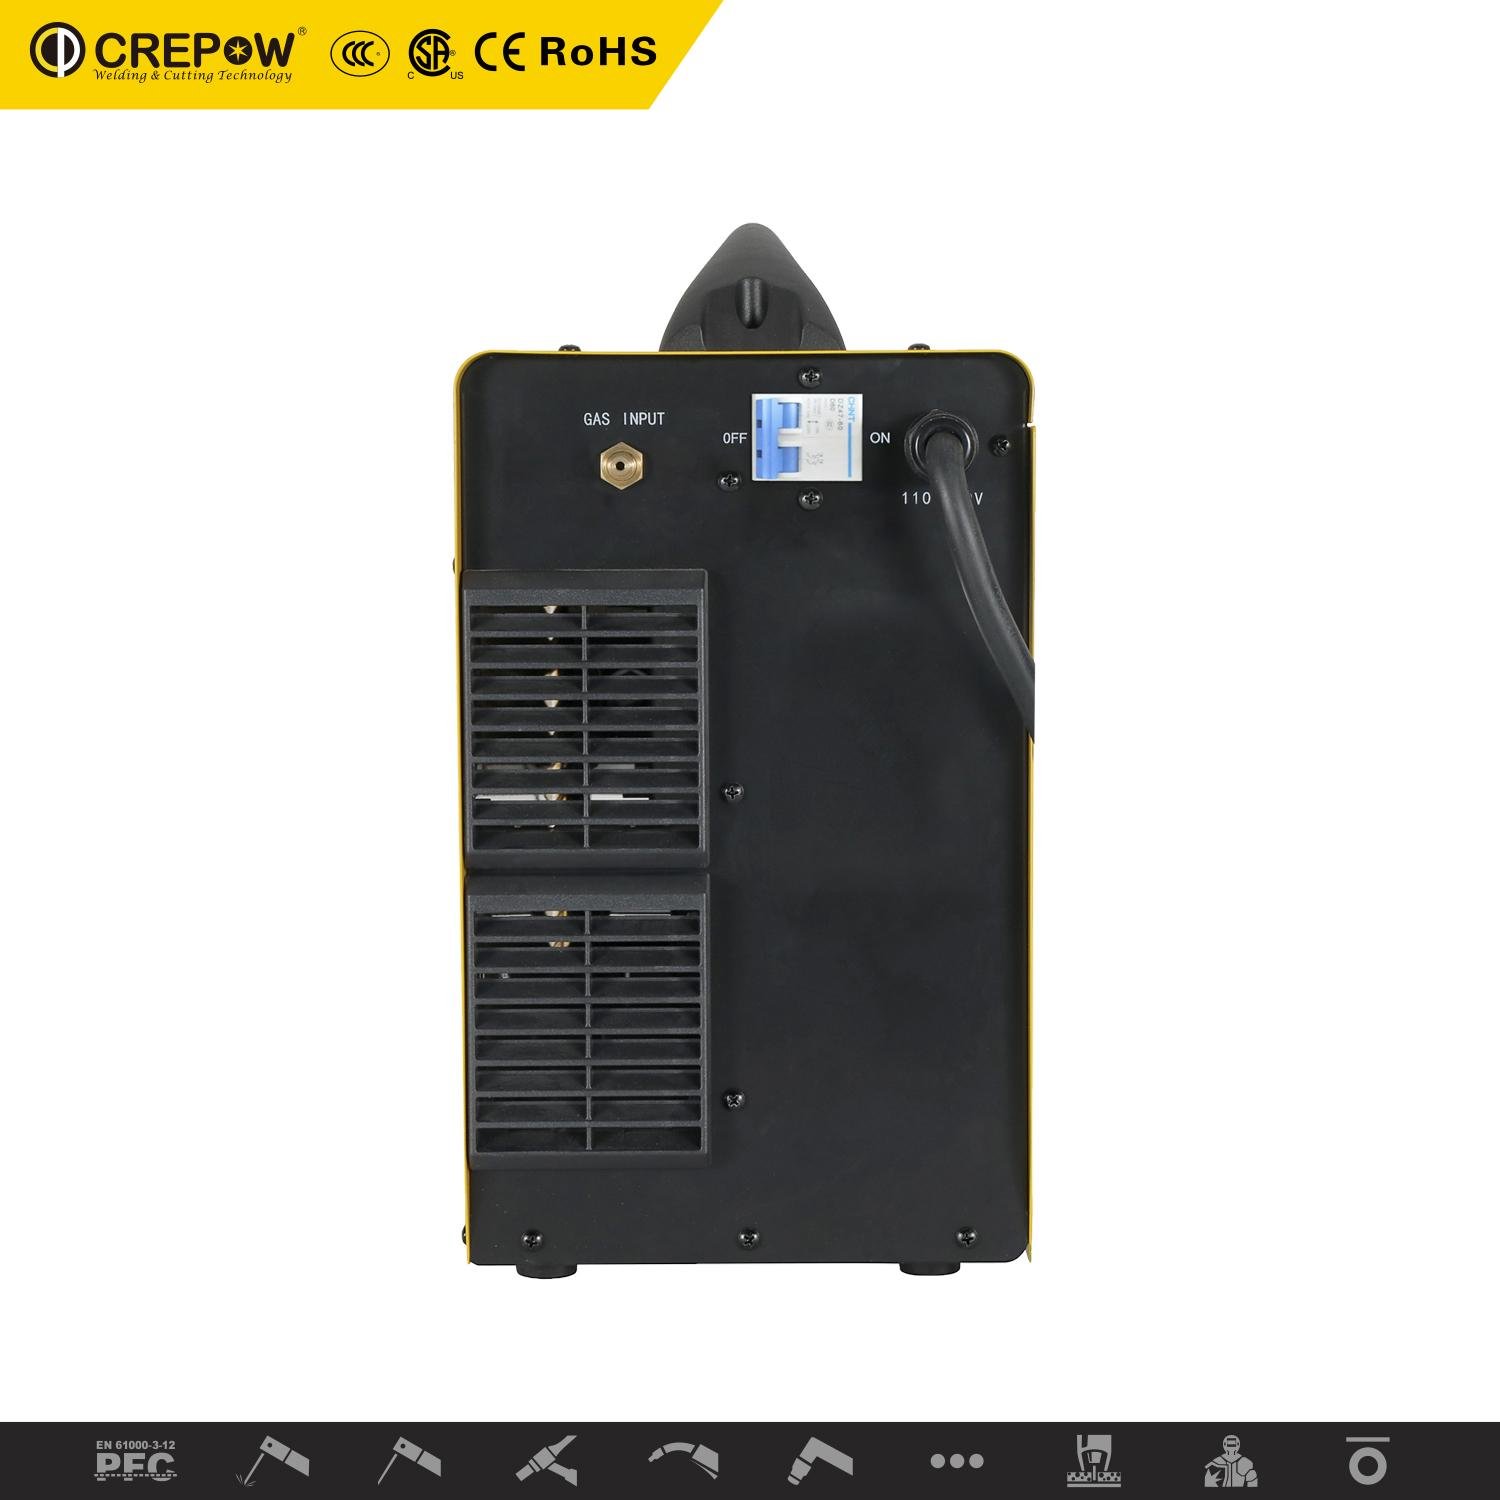 Crepow MULTIMIG250 PFC Inverter Multi Function MIG/STICK/LIFT TIG with PFC 4